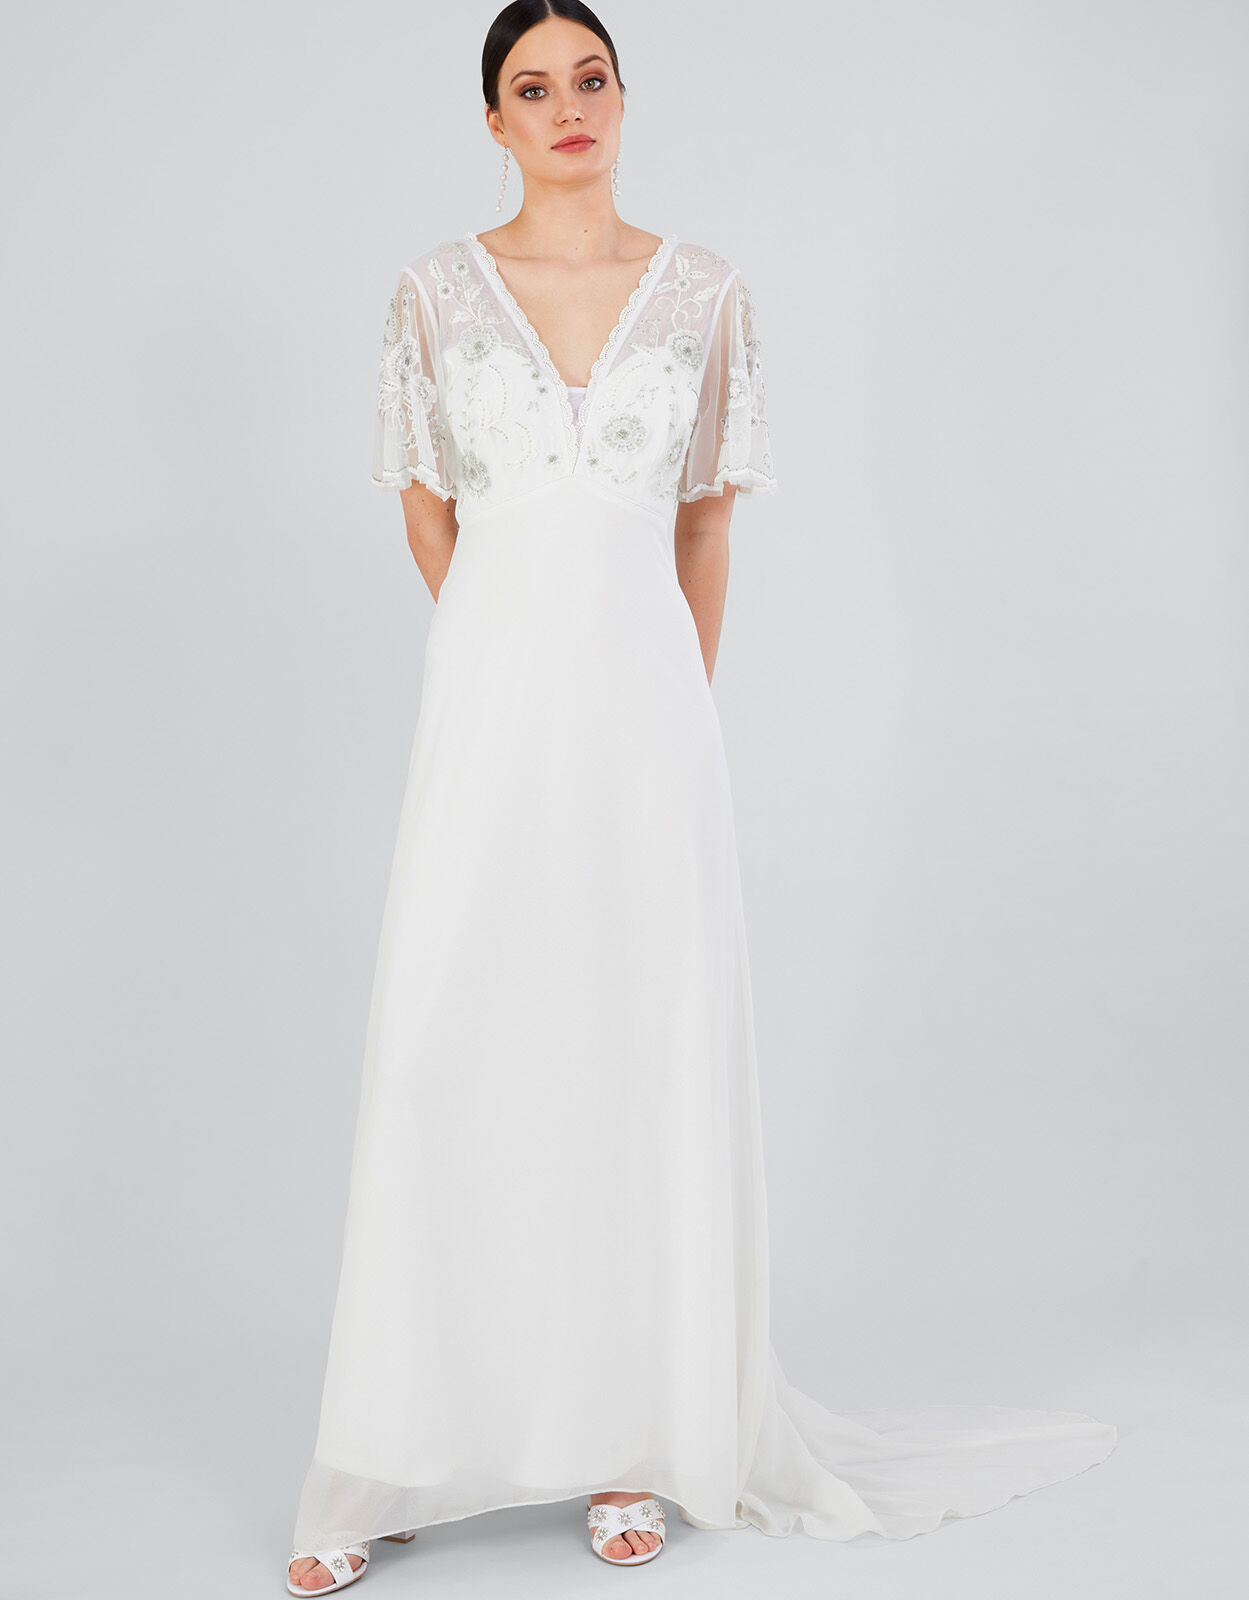 Shopping for a Wedding Dress Online Browse These Labels for All Your Bridal  Looks  Vogue